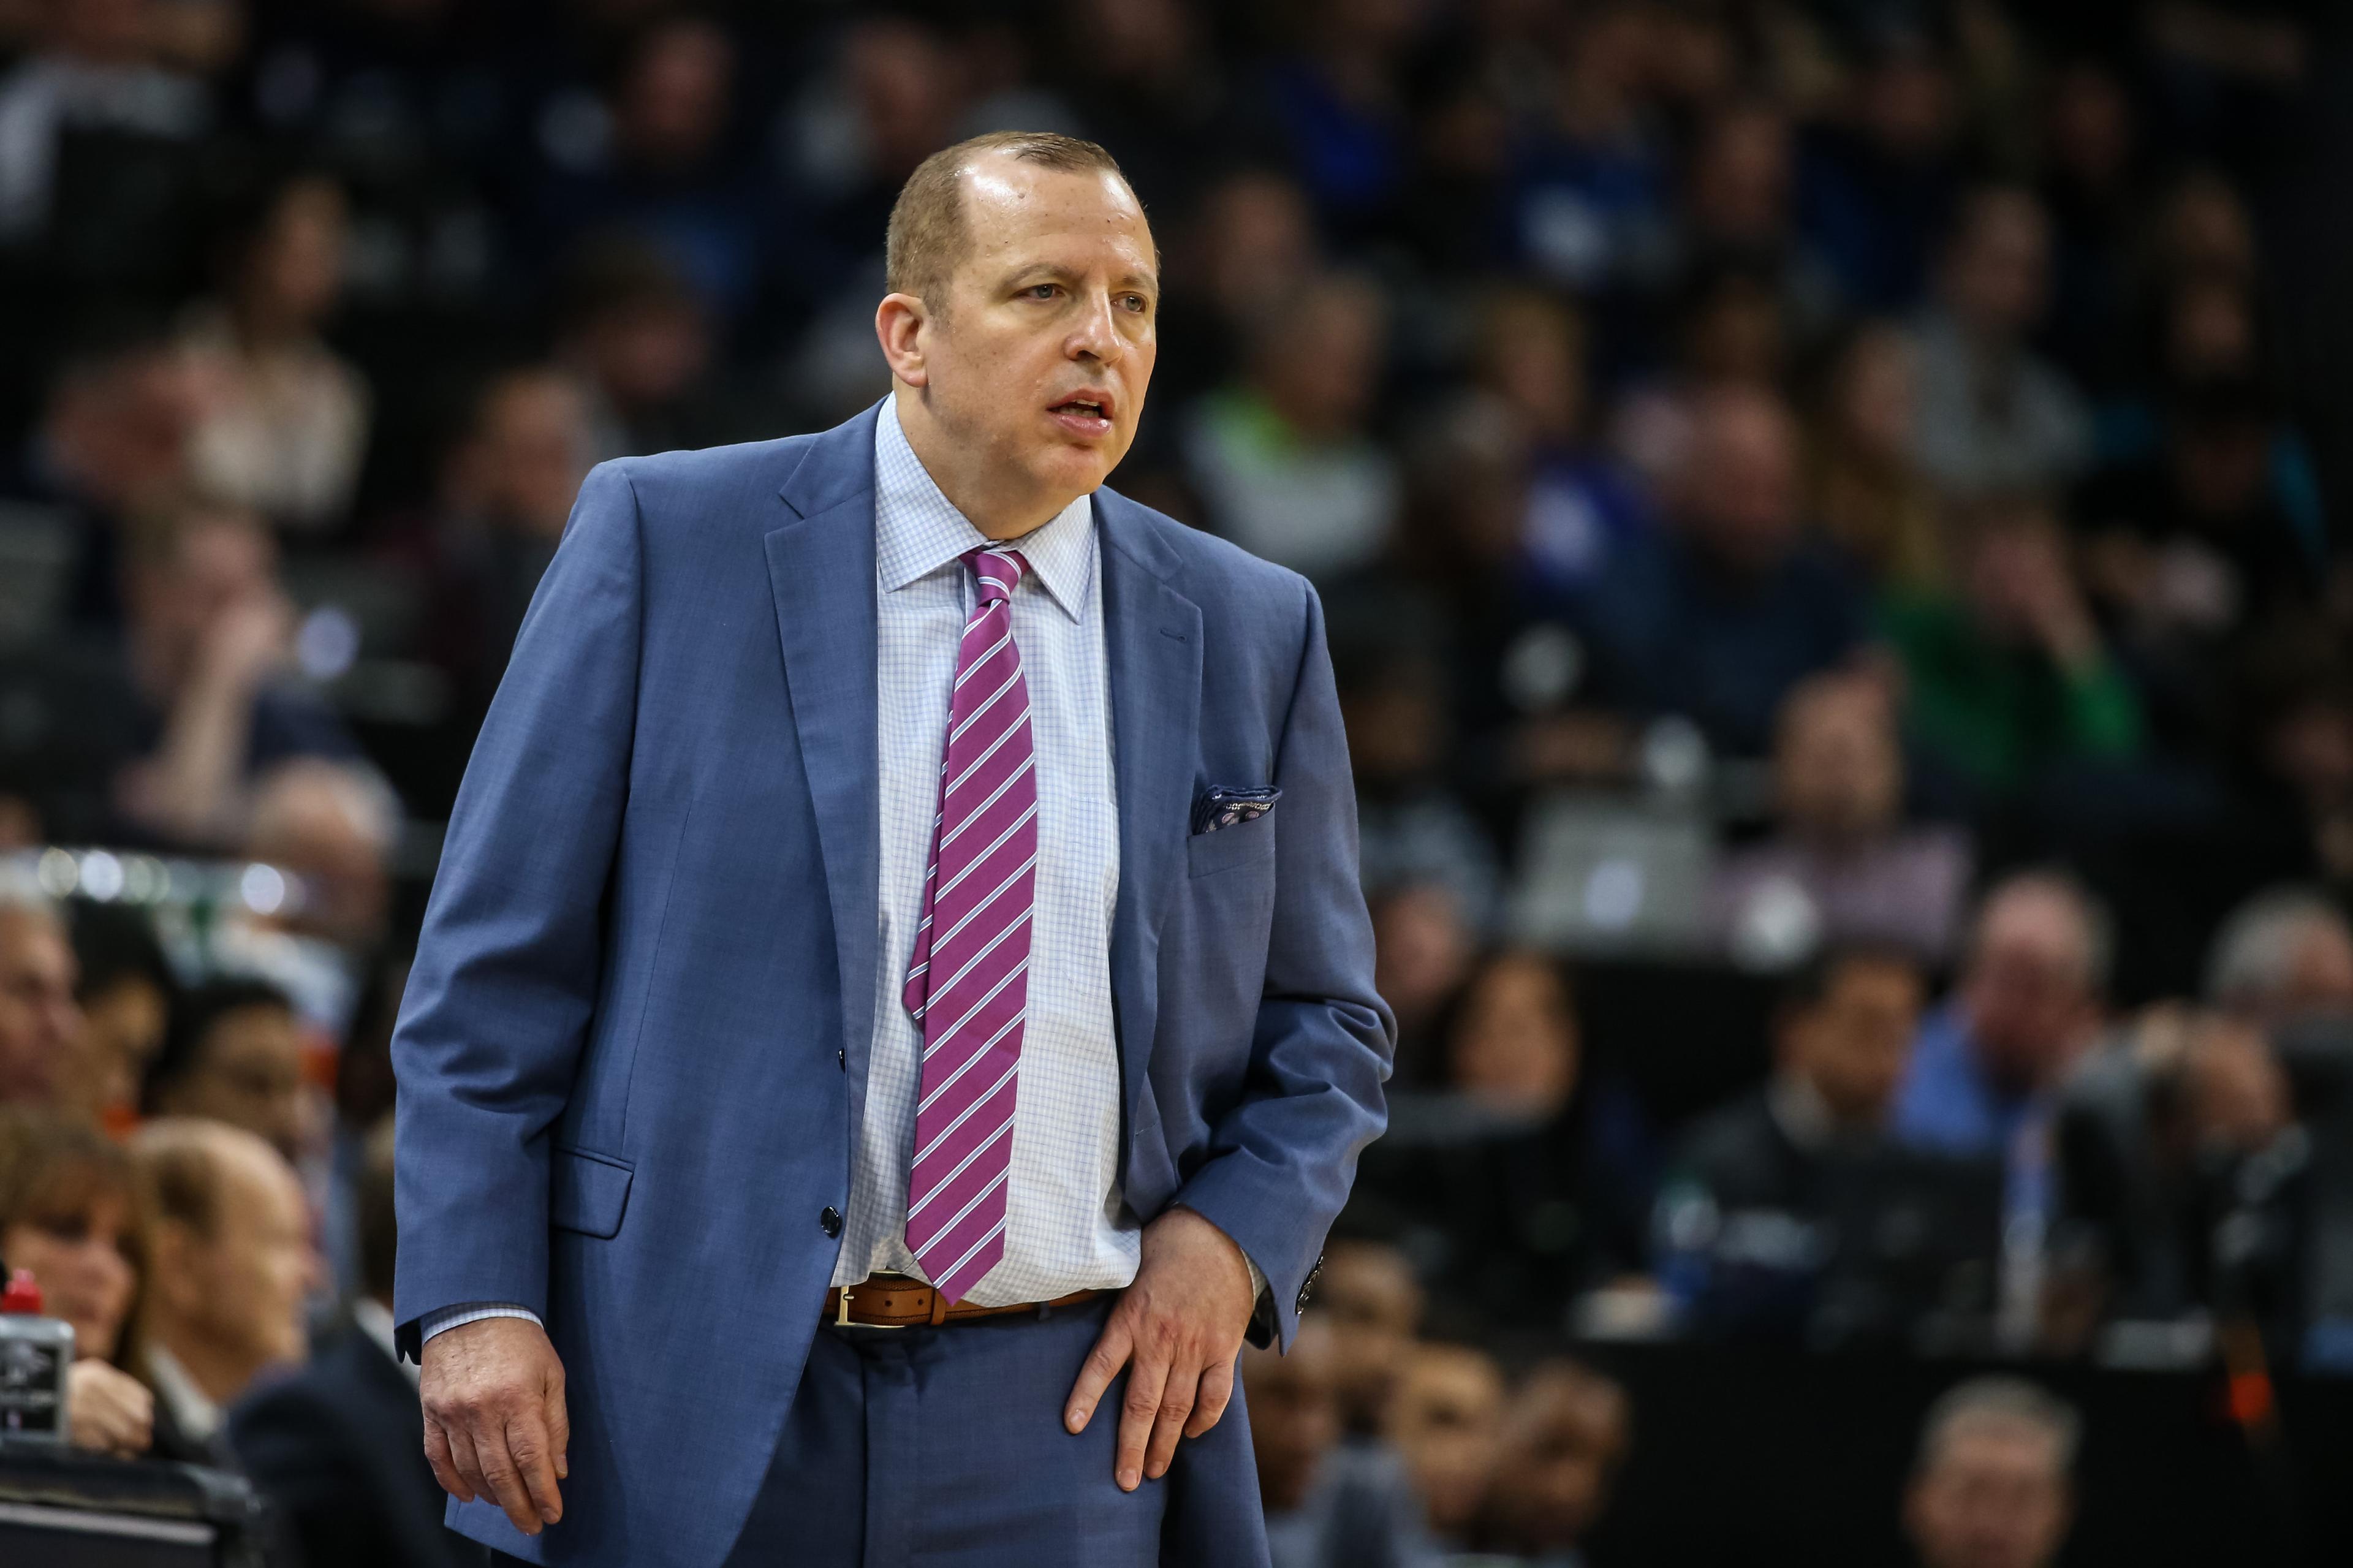 Minnesota Timberwolves head coach Tom Thibodeau looks on during the first quarter against the New Orleans Pelicans at Target Center. / Brace Hemmelgarn-USA TODAY Sports